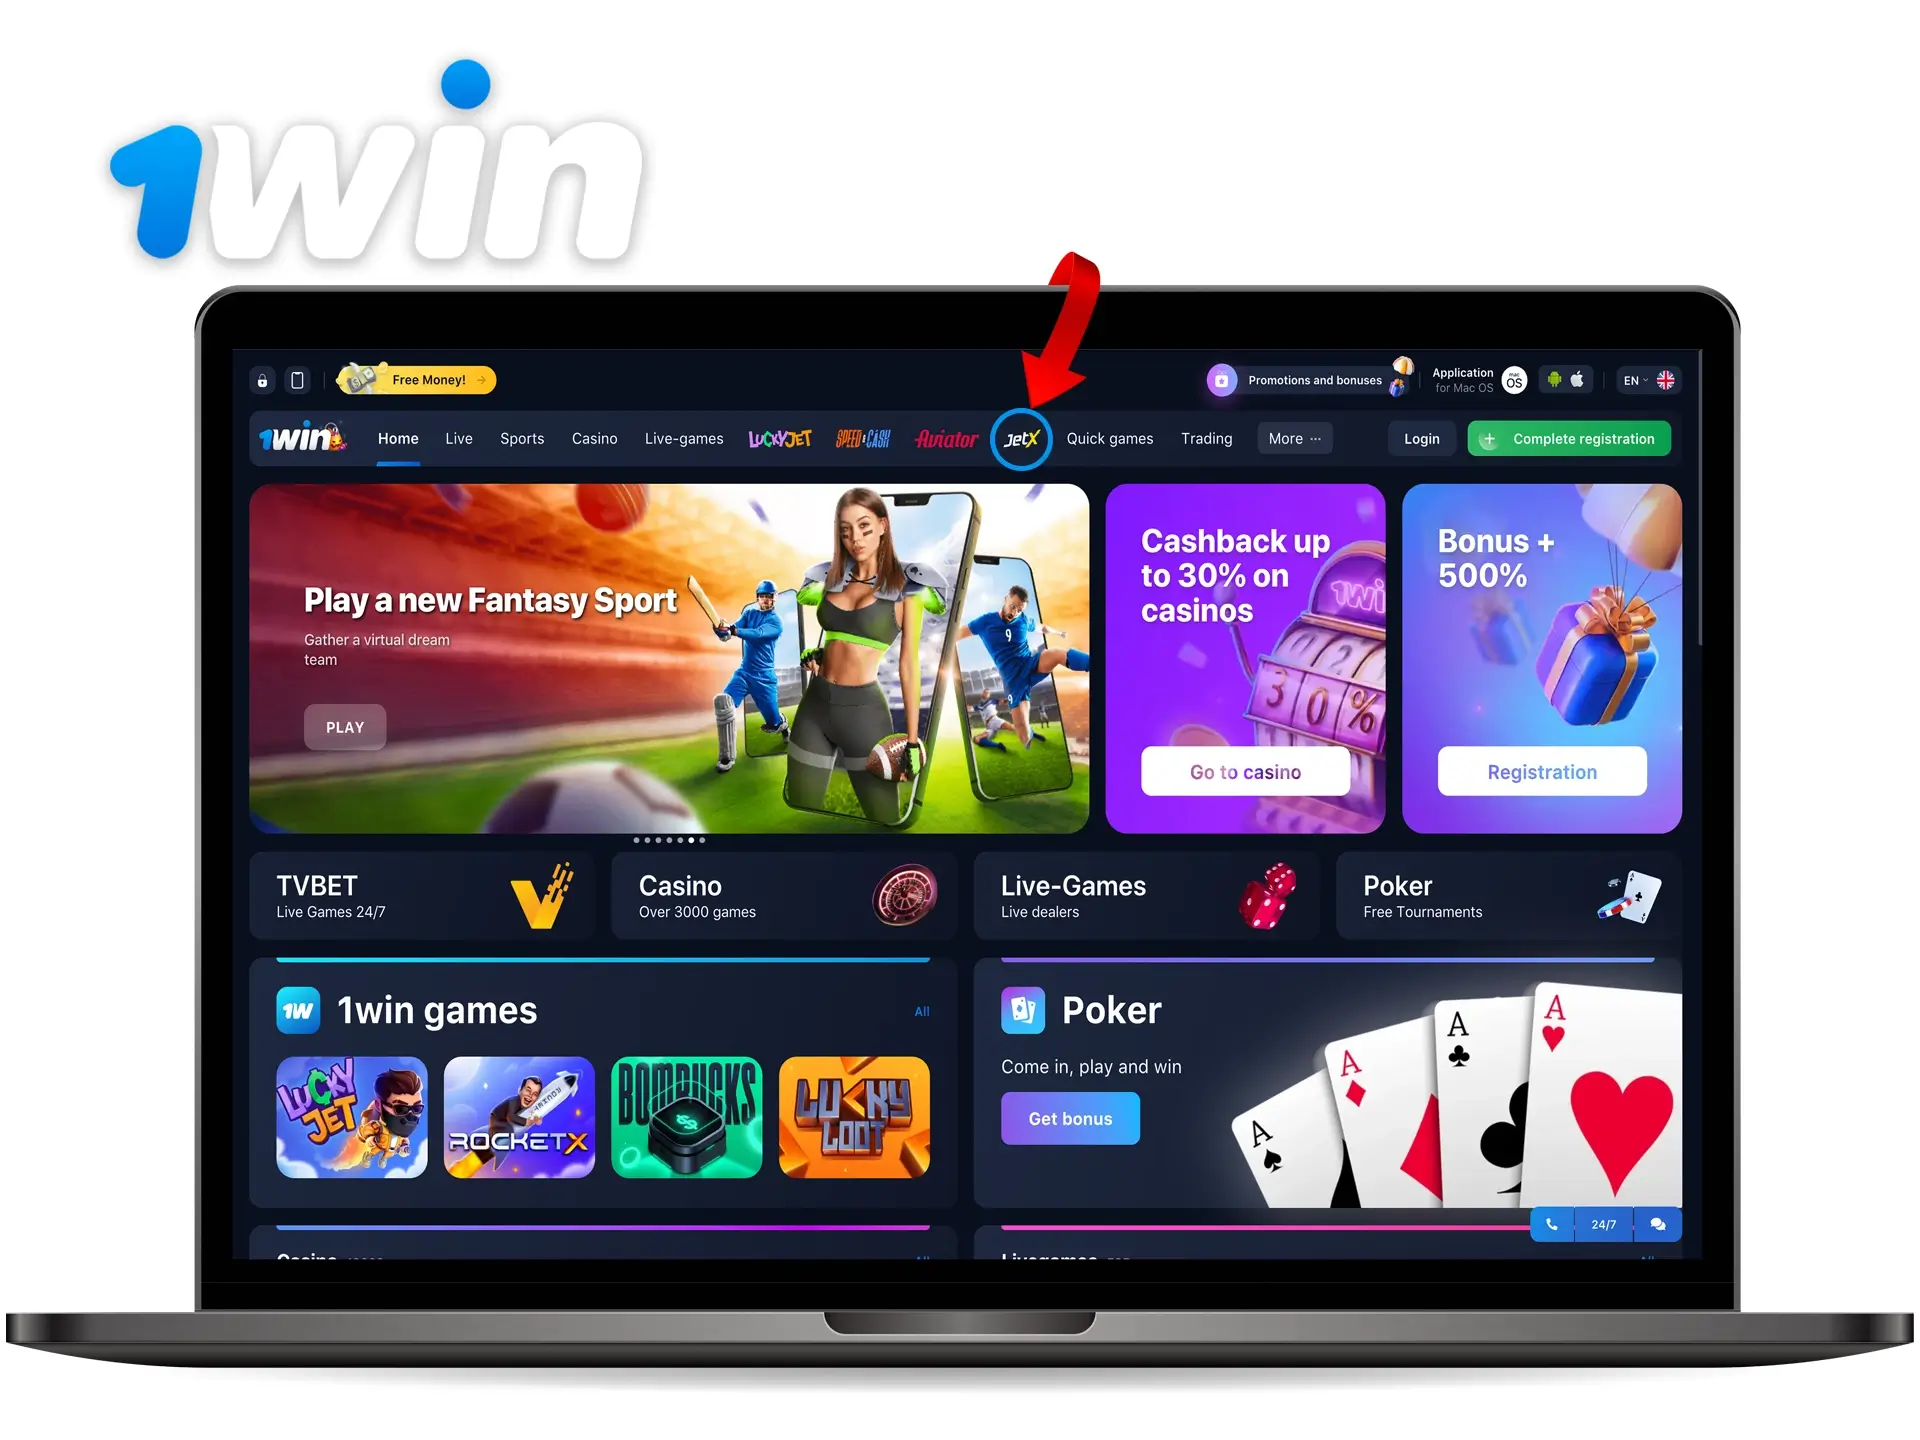 The game icon is prominently displayed on the title page of the 1Win website.